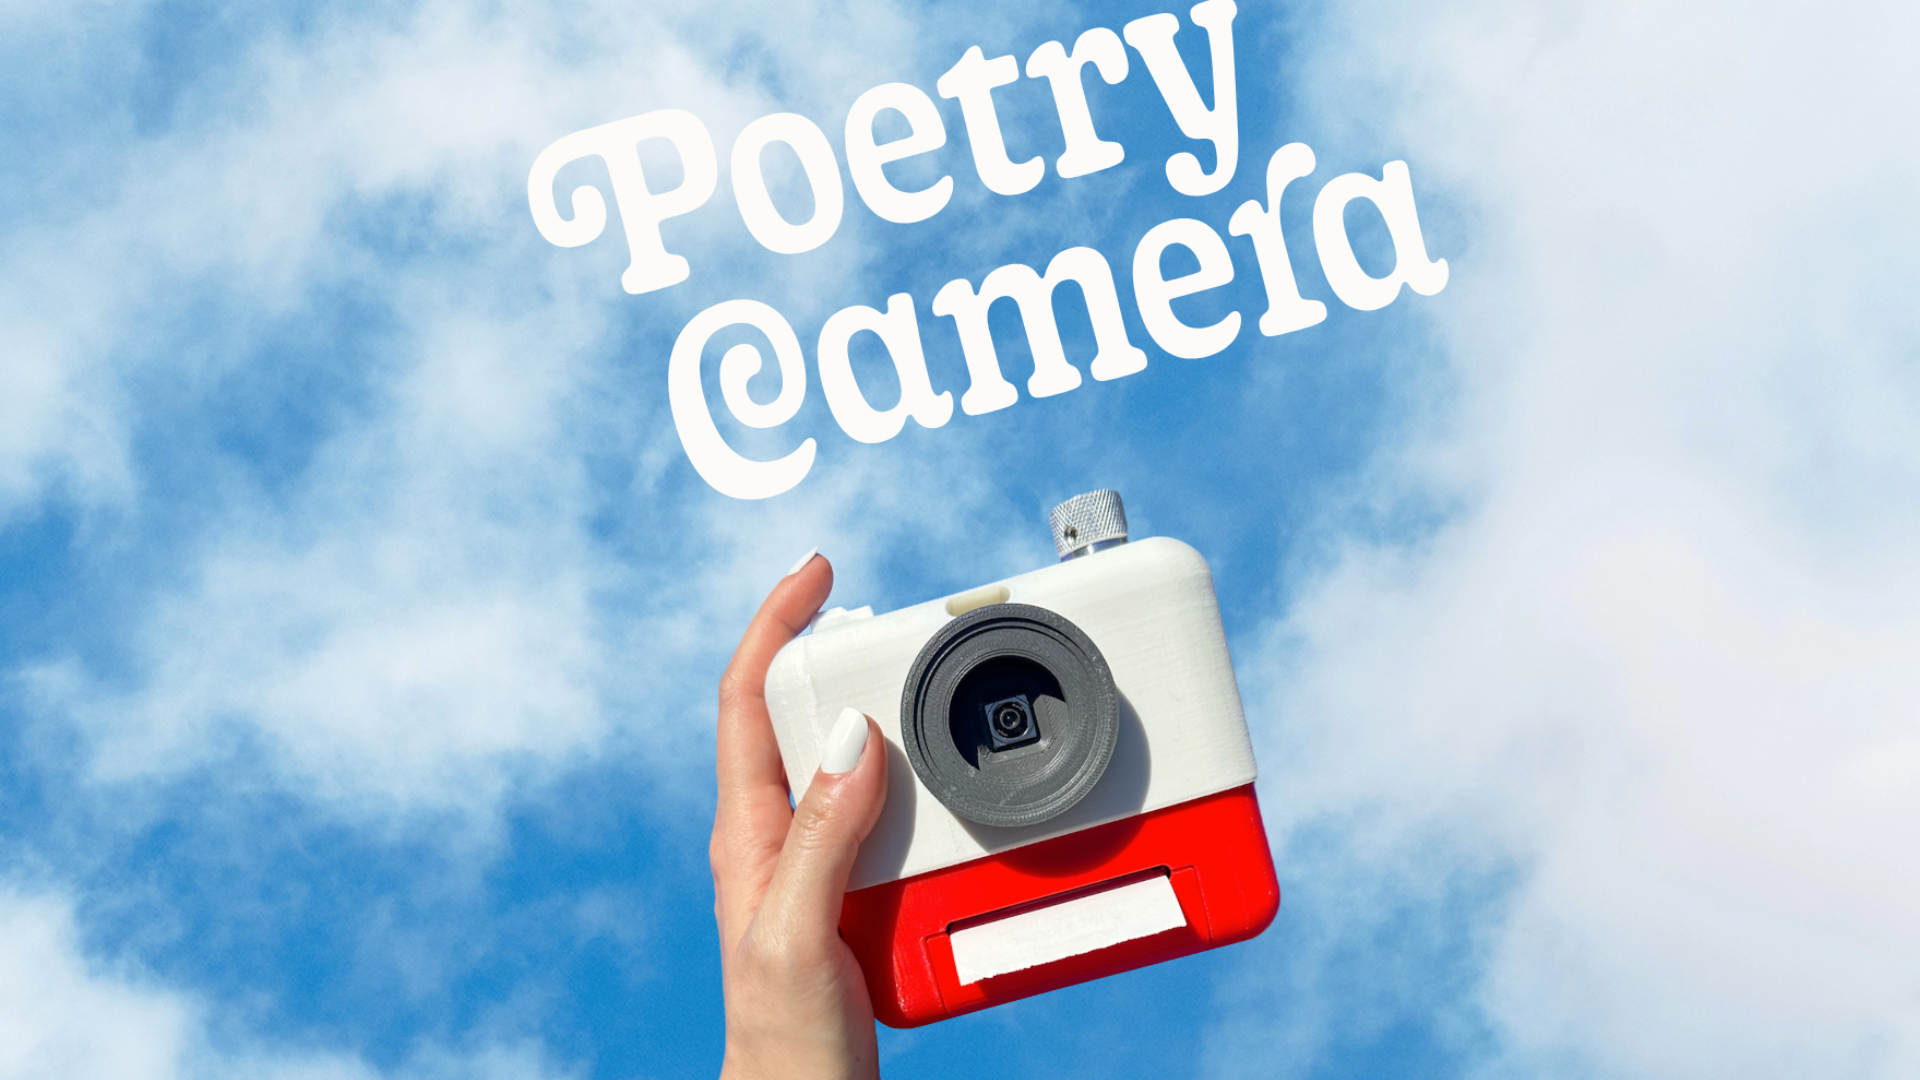 This Polaroid Camera Turns Pictures into Poems